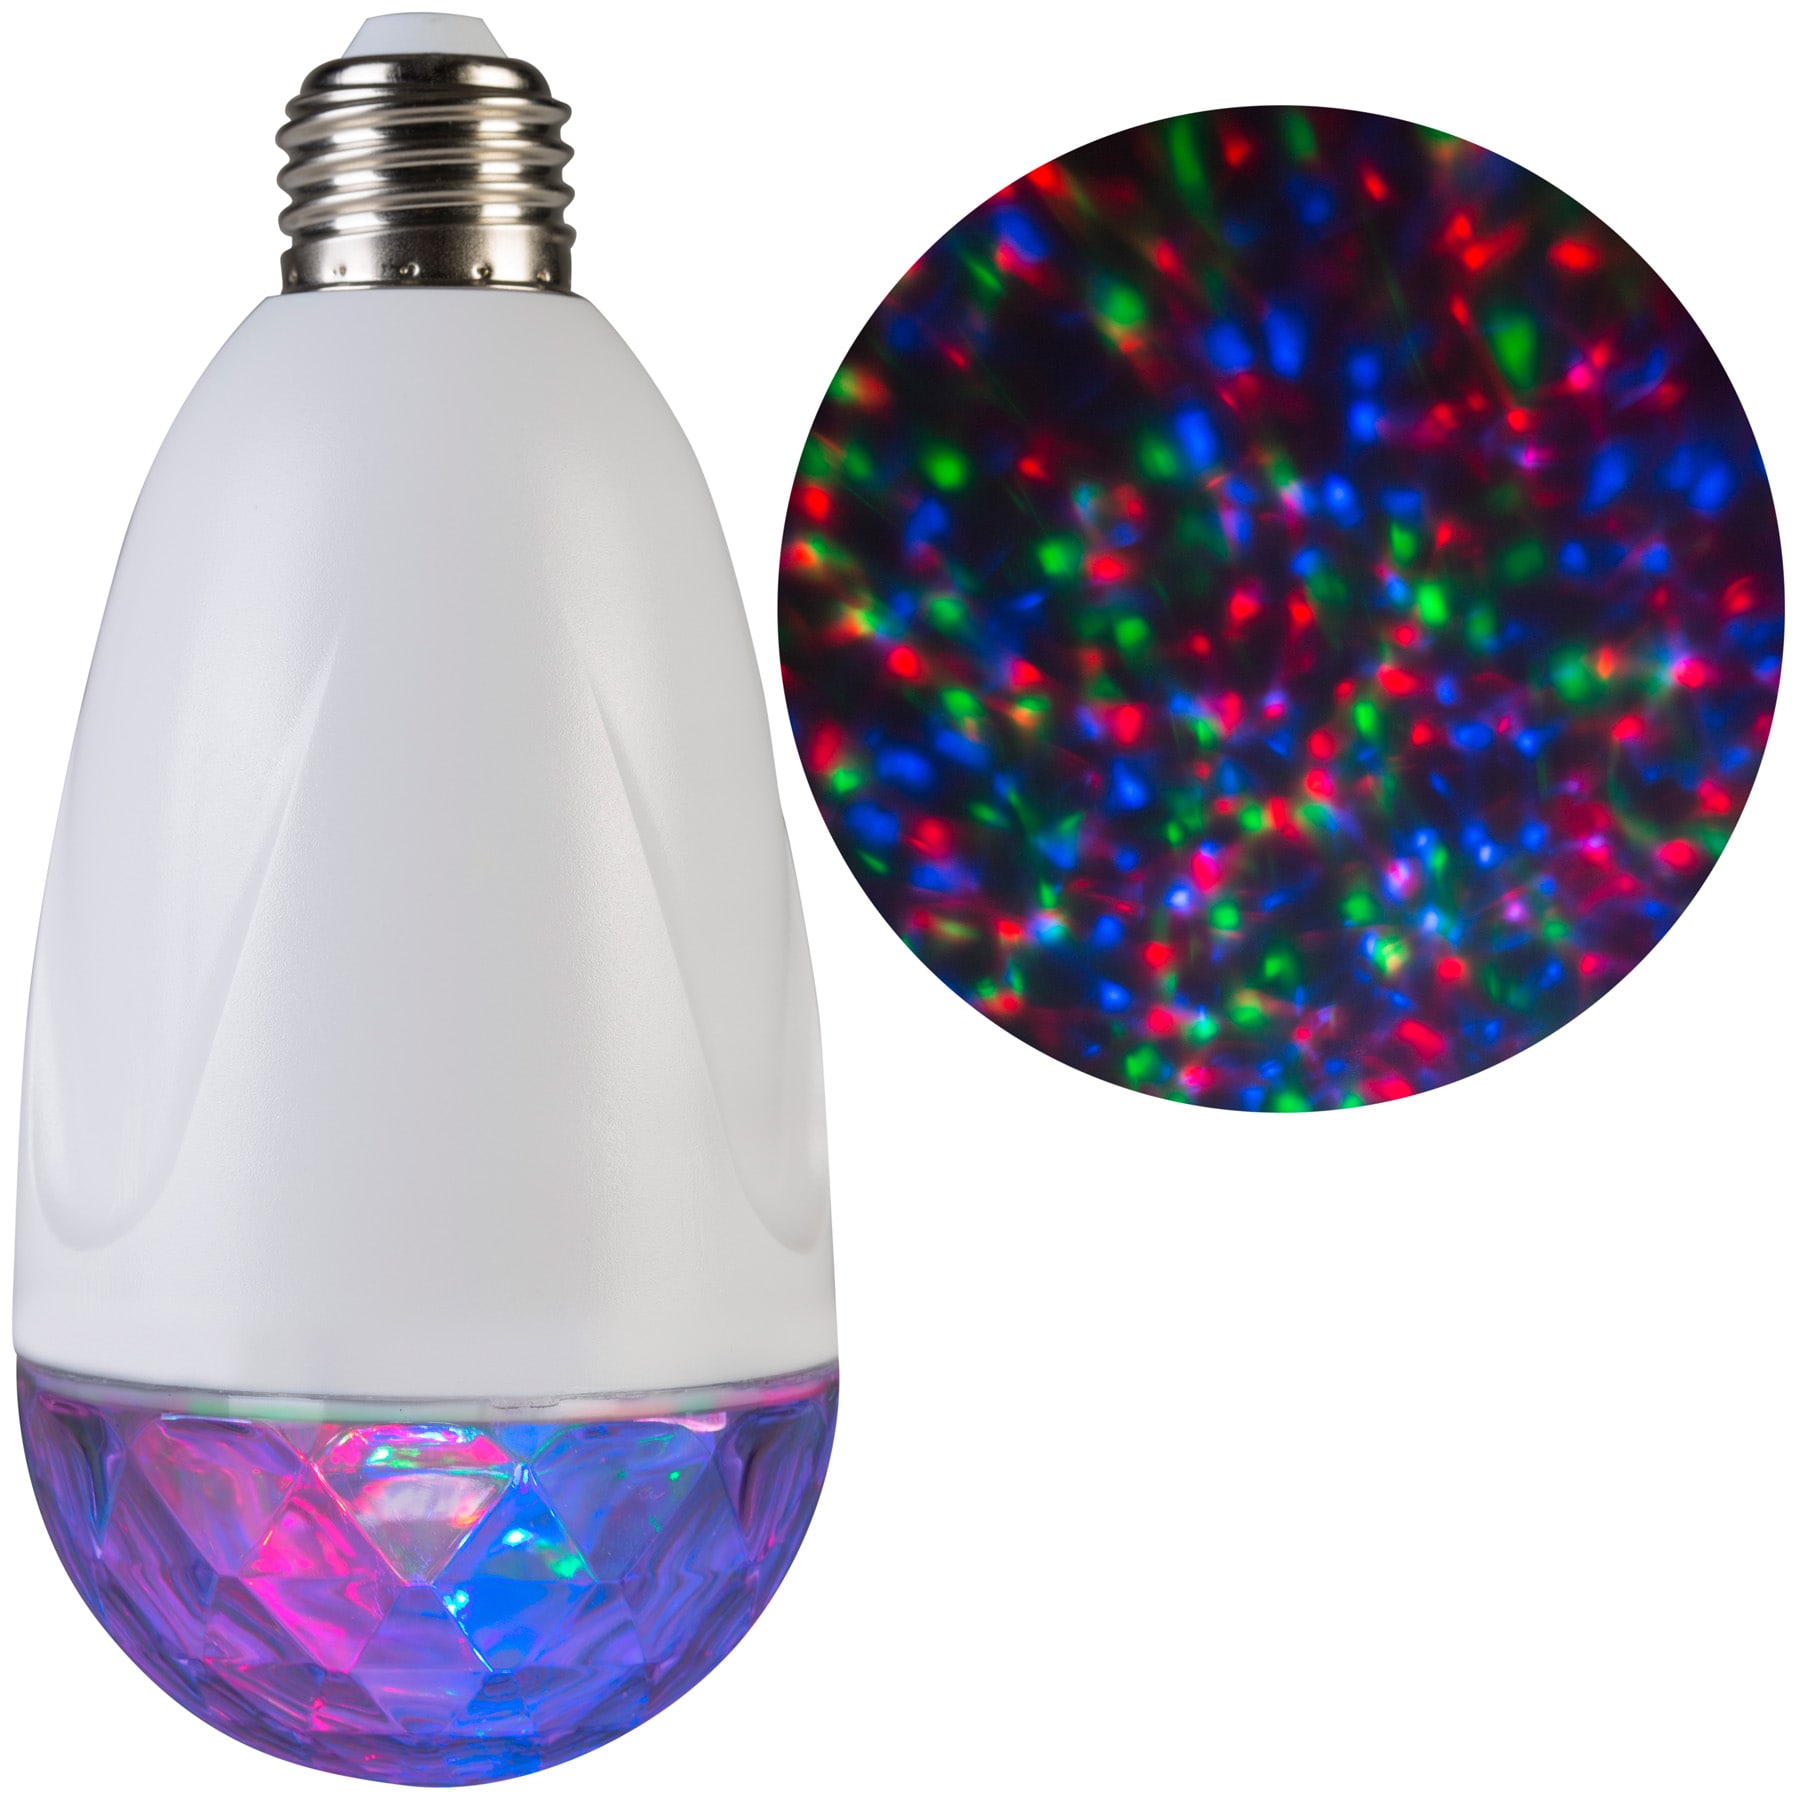 Åre hagl kimplante Gemmy Projection Light bulb Swirling Green, Red,Blue Electrical Outlet  Kaleidoscope Christmas Indoor Light Show Projector at Lowes.com